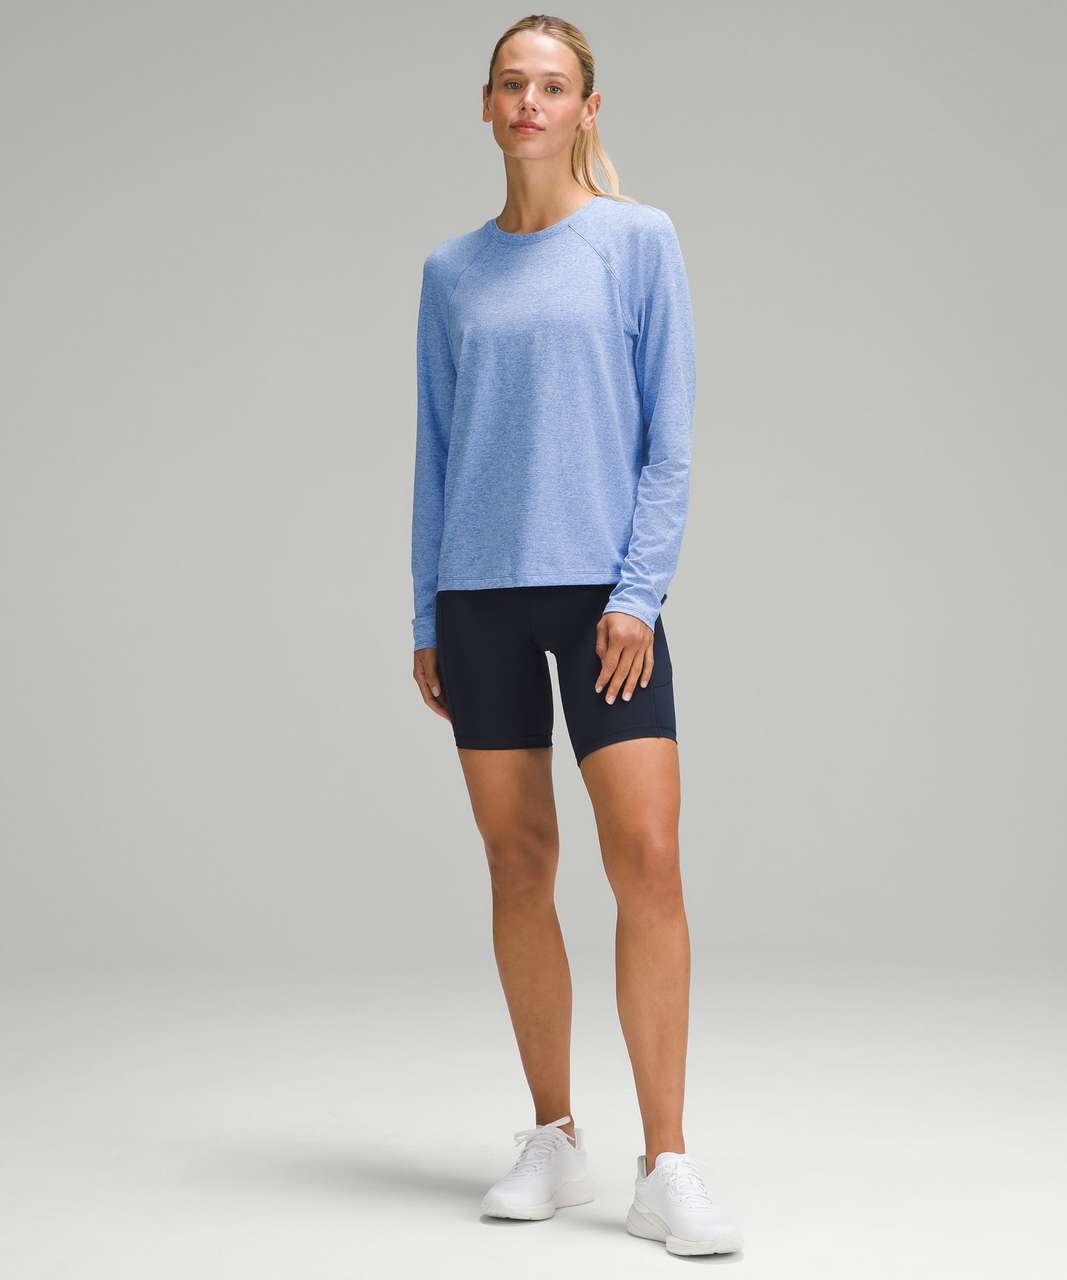 Lululemon License to Train Classic-Fit Long-Sleeve Shirt - Heathered Pipe Dream Blue